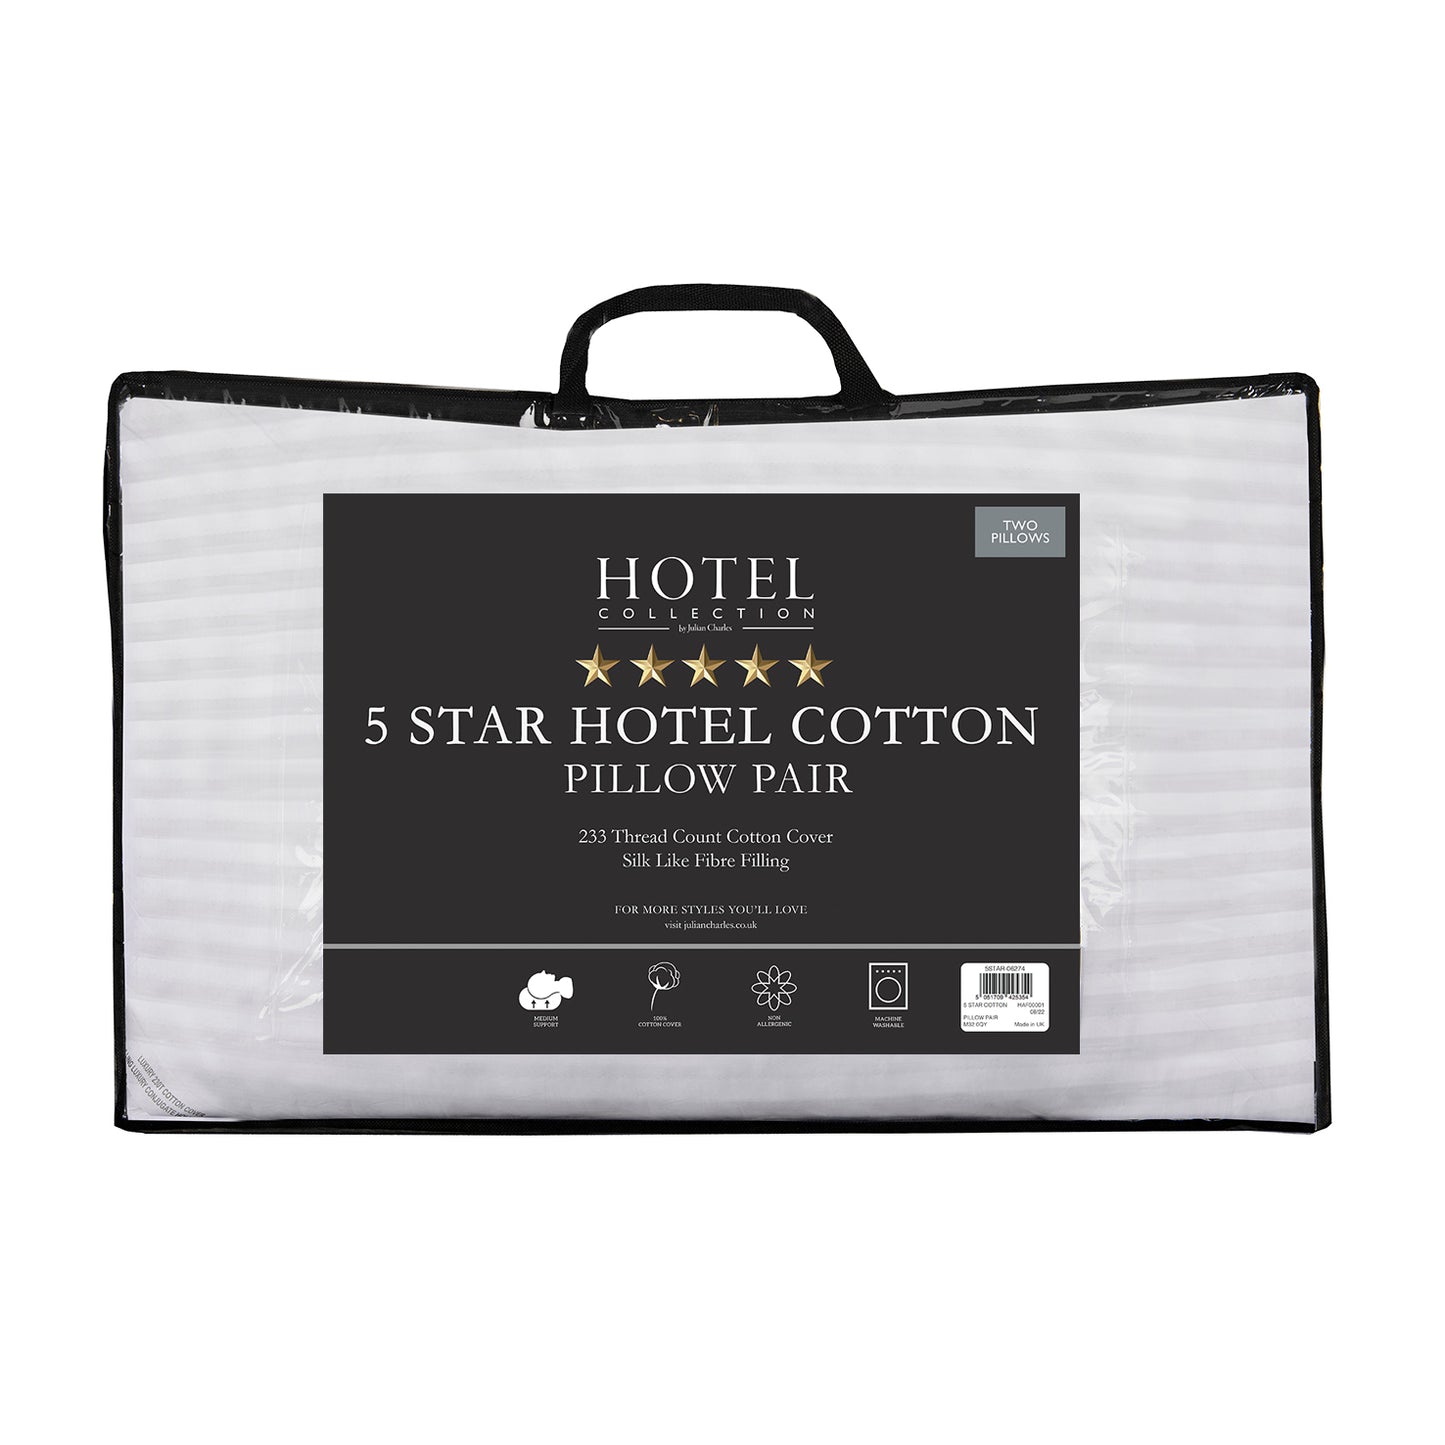 5 Star Hotel Collection Cotton Cover Pillow Pair - Medium Support